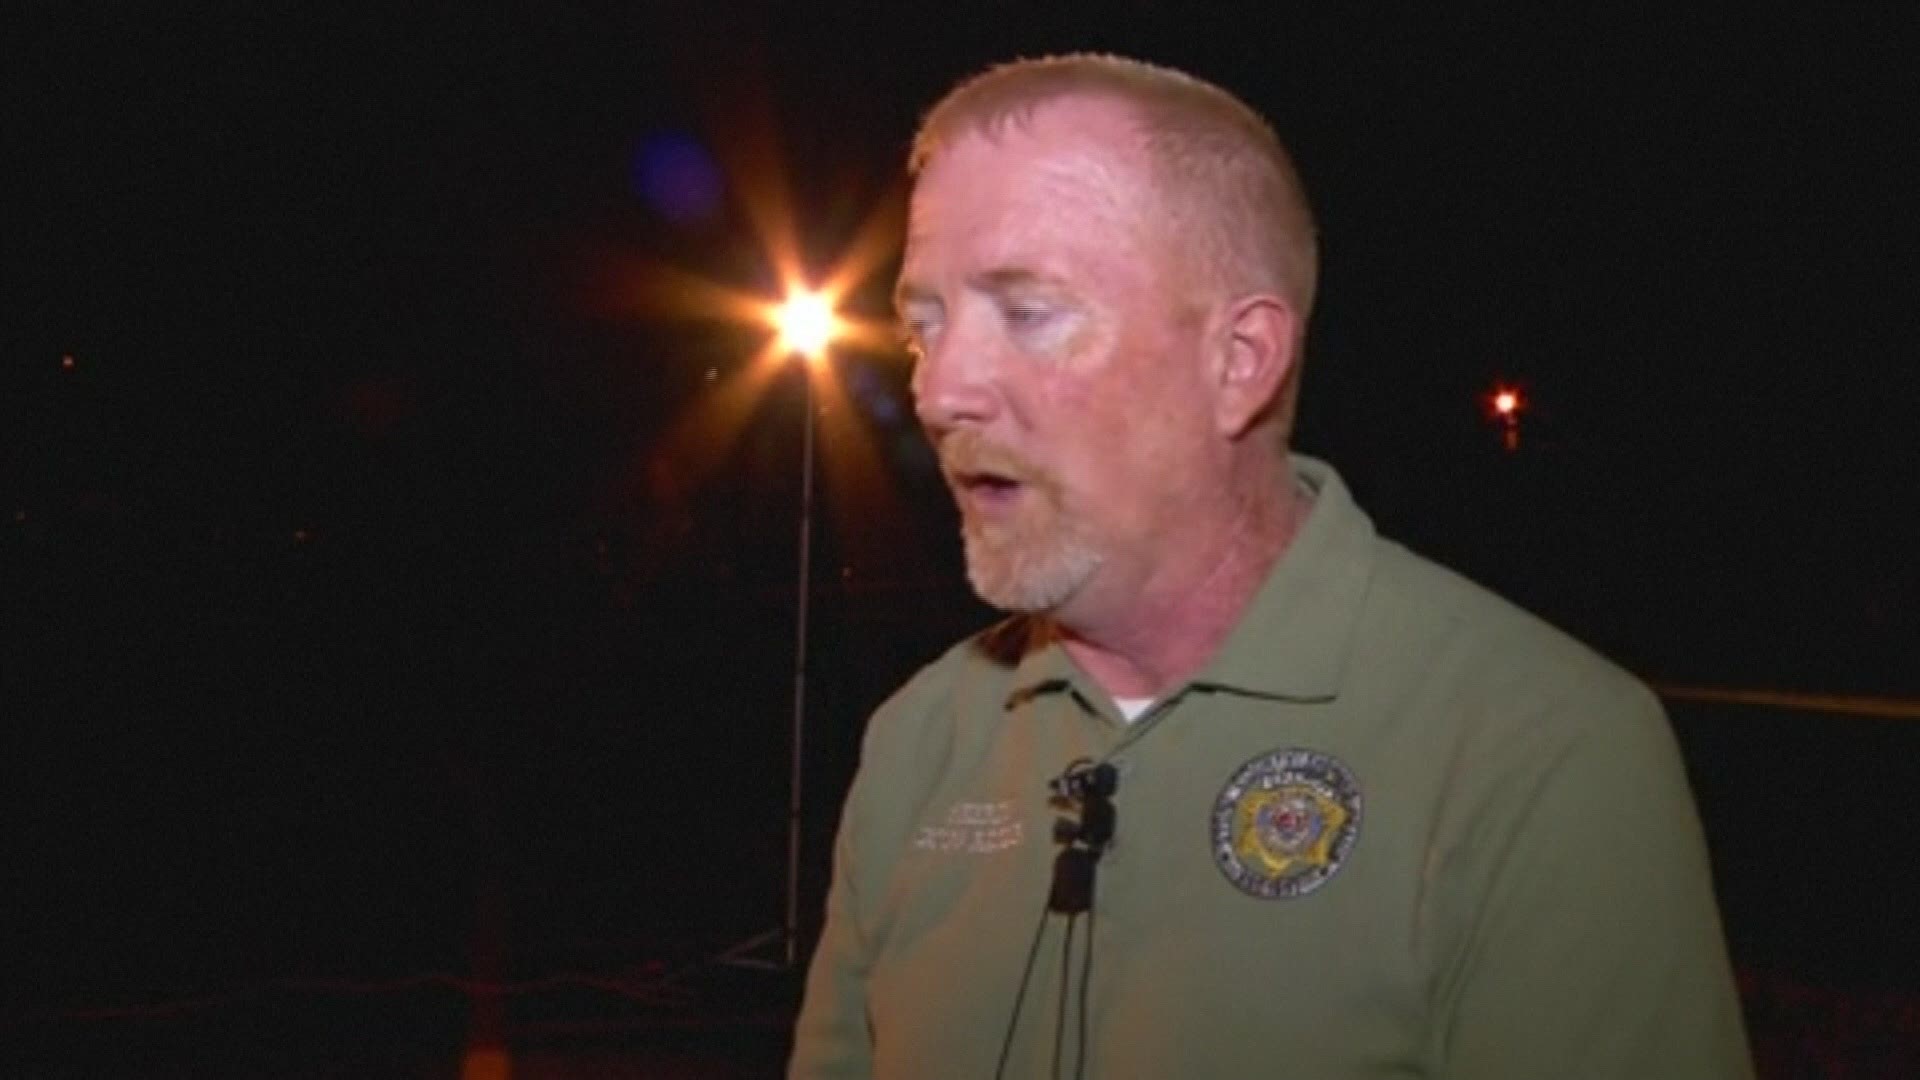 Stone County Sheriff Doug Rader said 31 people were on board the boat in Table Rock Lake when a strong storm blew through the area at around 7 p.m.